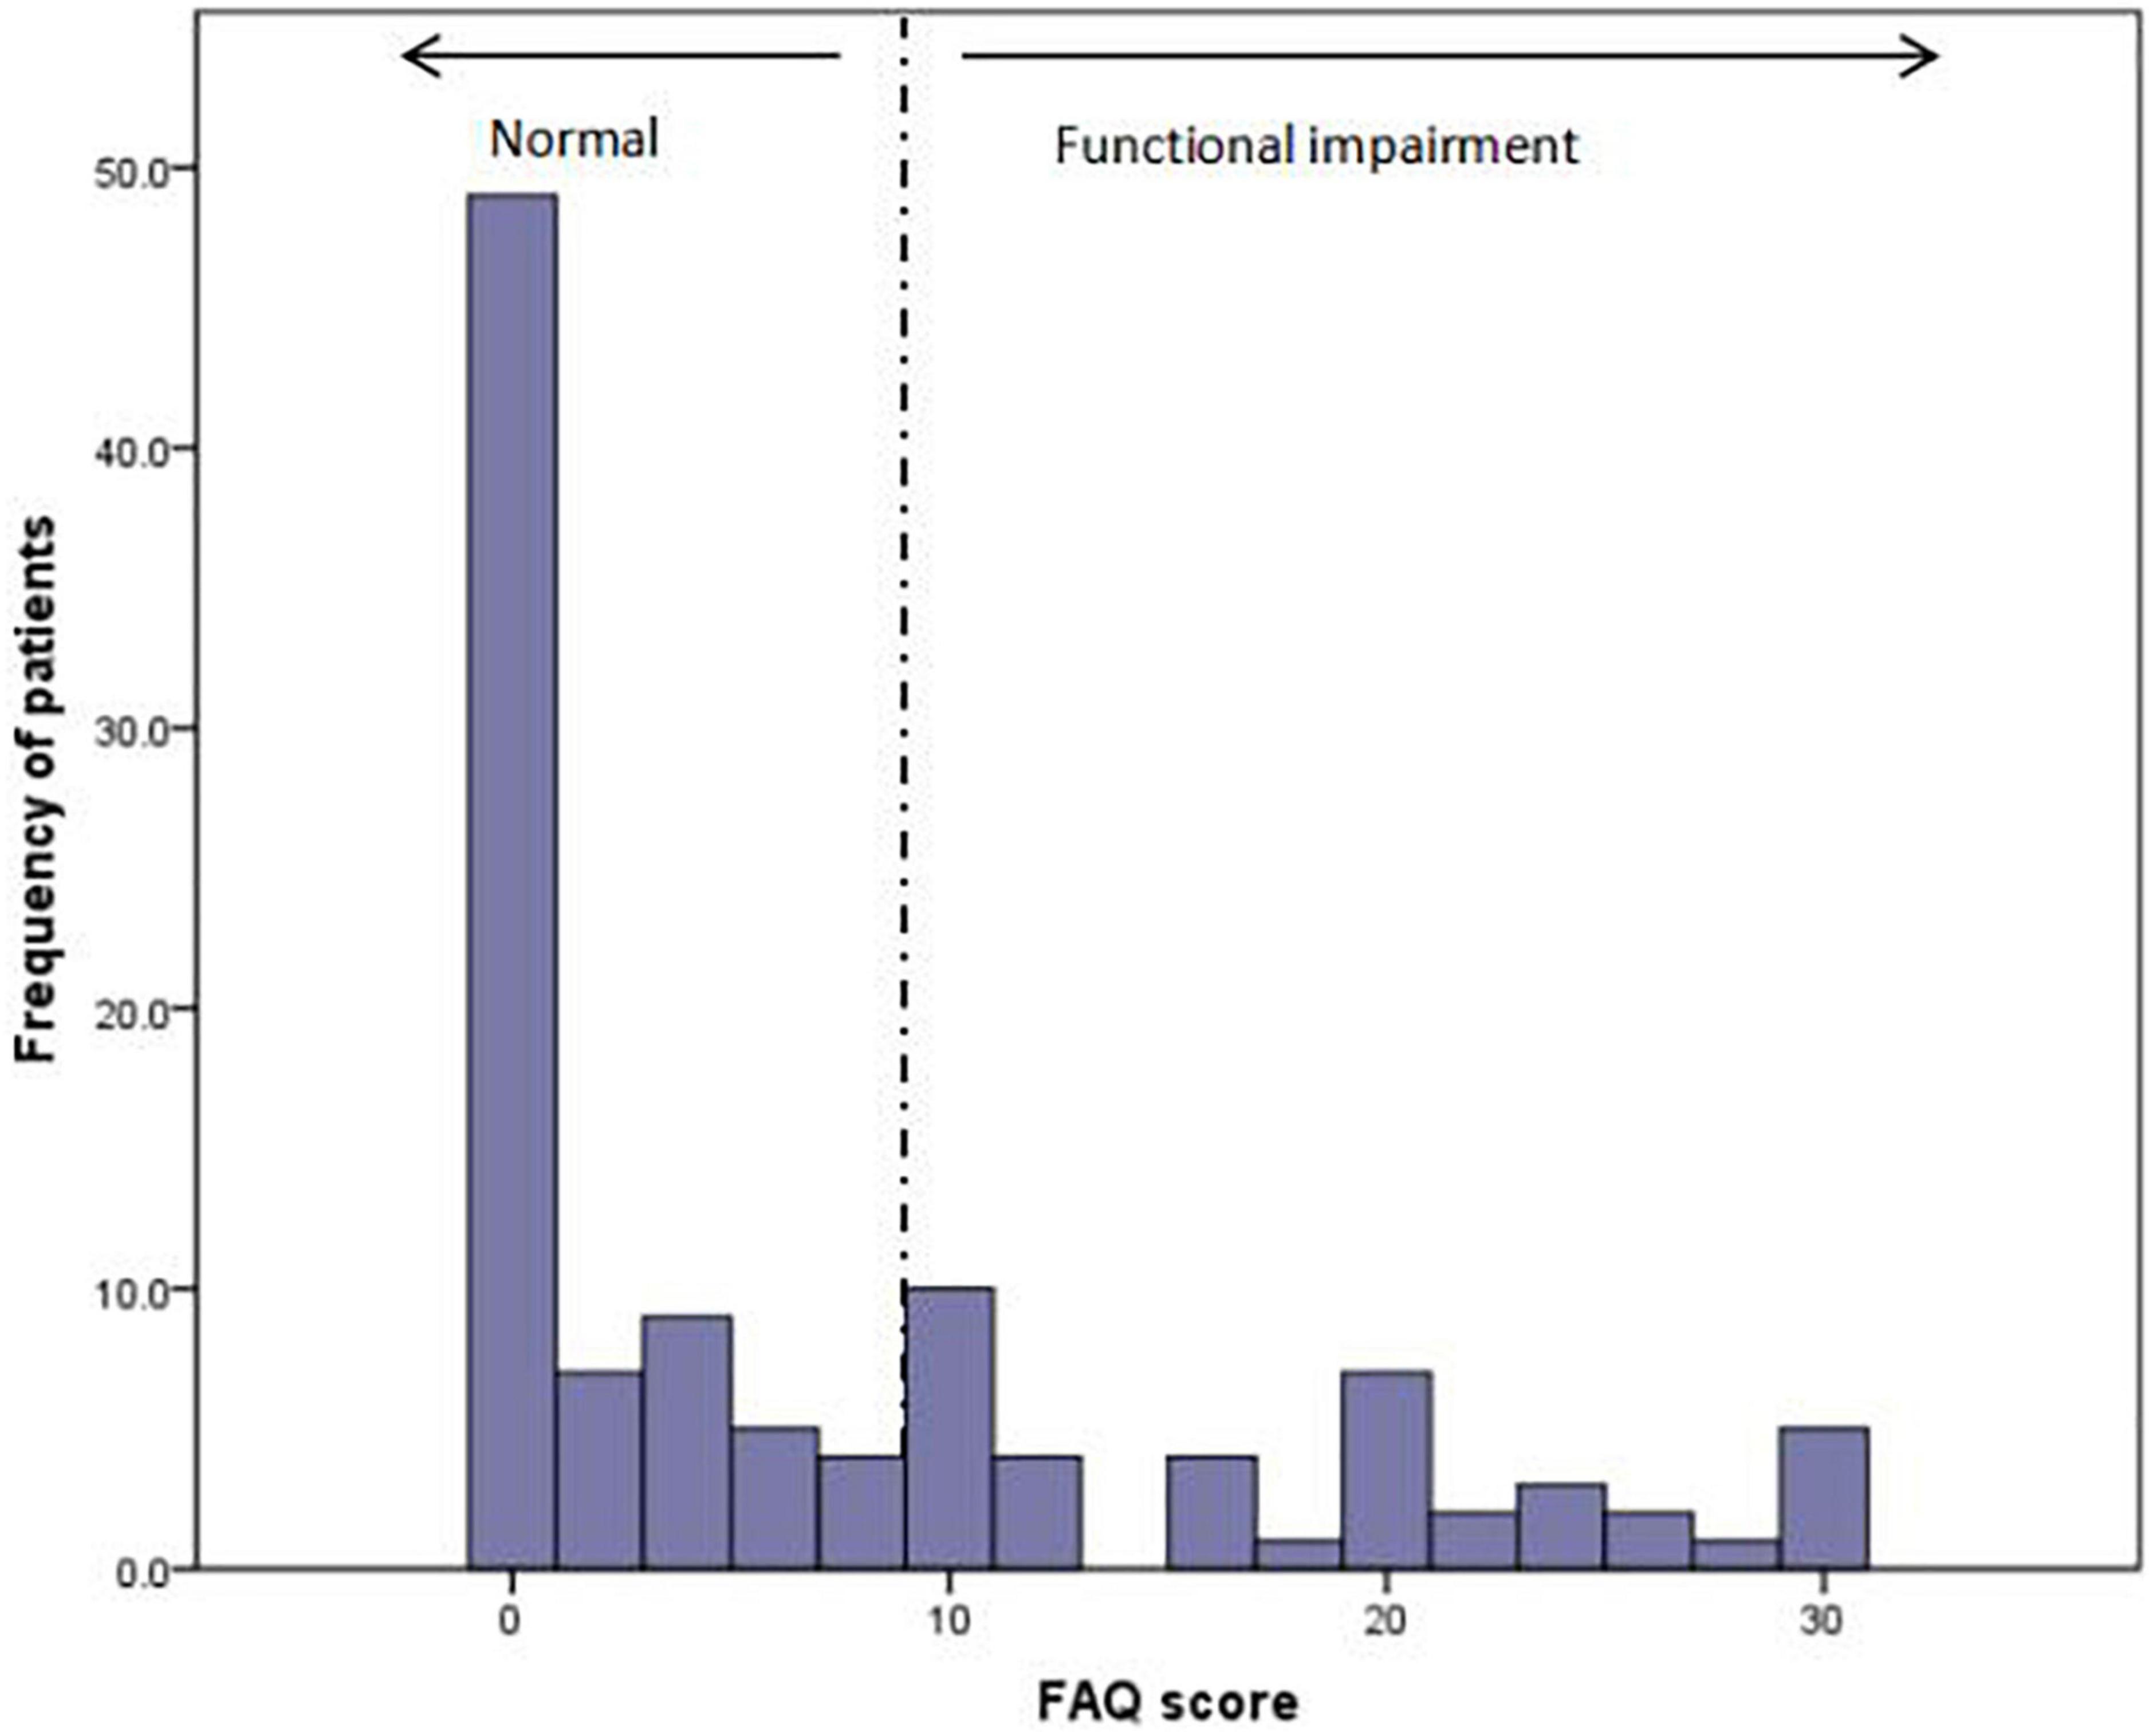 Predictors of everyday functional impairment in older patients with schizophrenia: A cross-sectional study